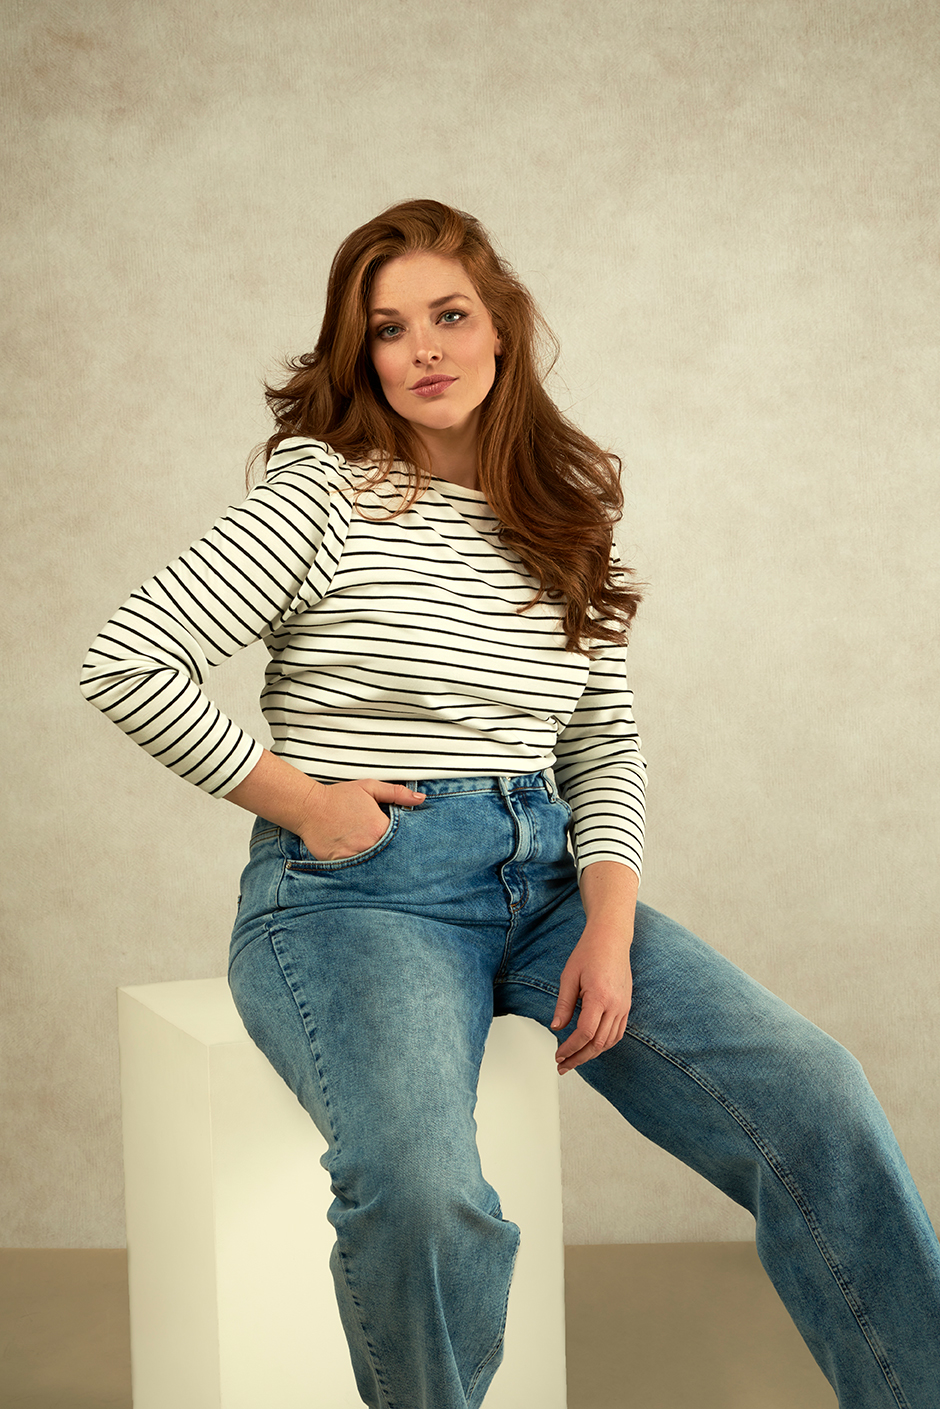 Plussize Model on a white wooden pilar on a textured background. Wearing stripes and jeans.